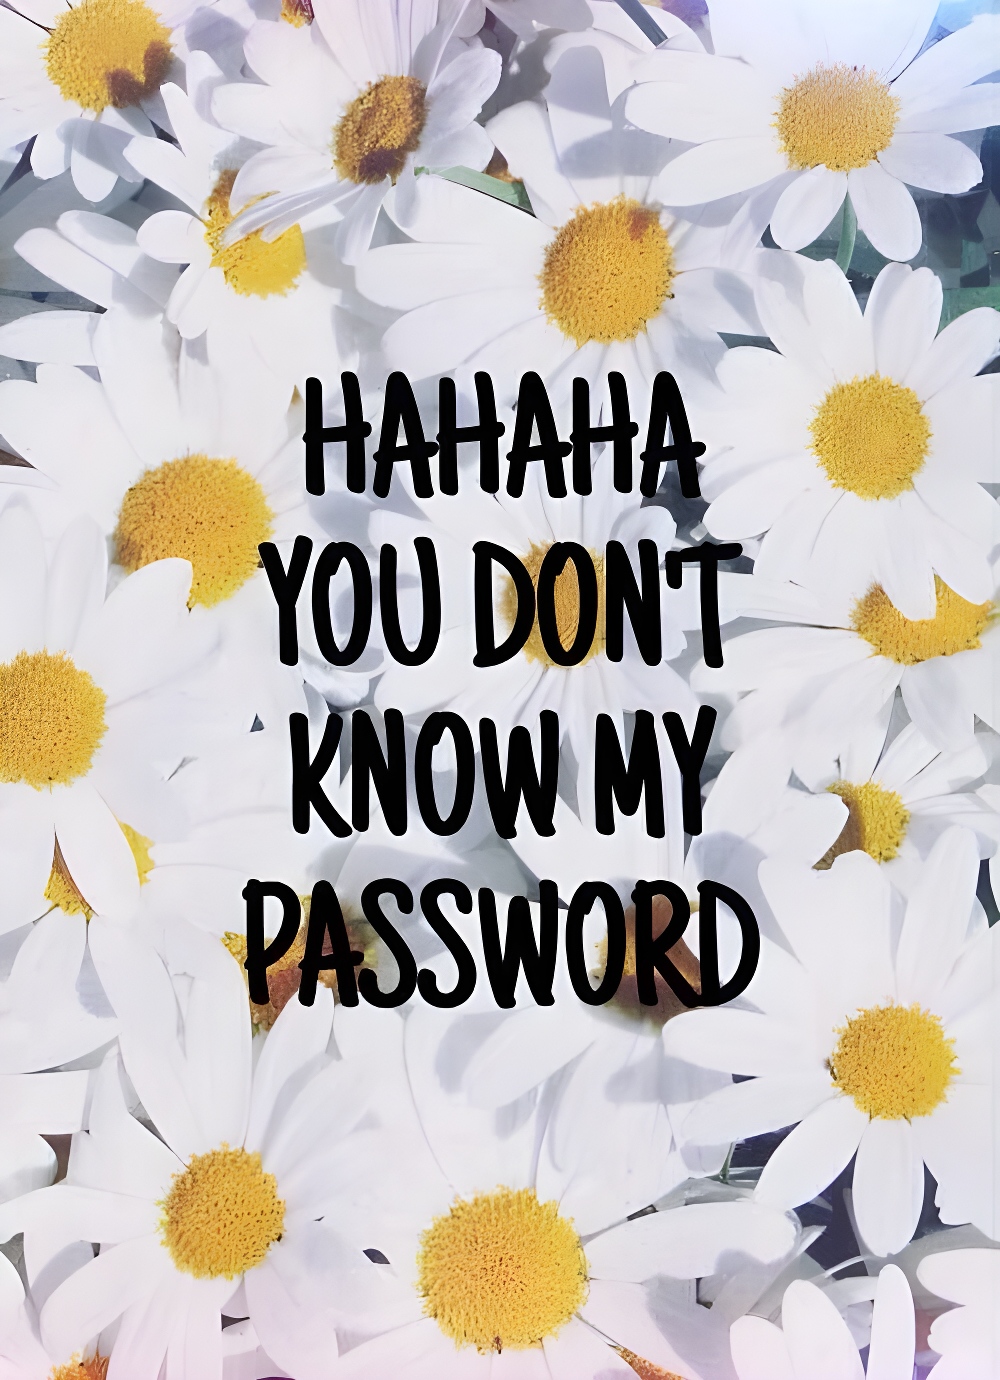 Haha you dont know my password wallpaper download